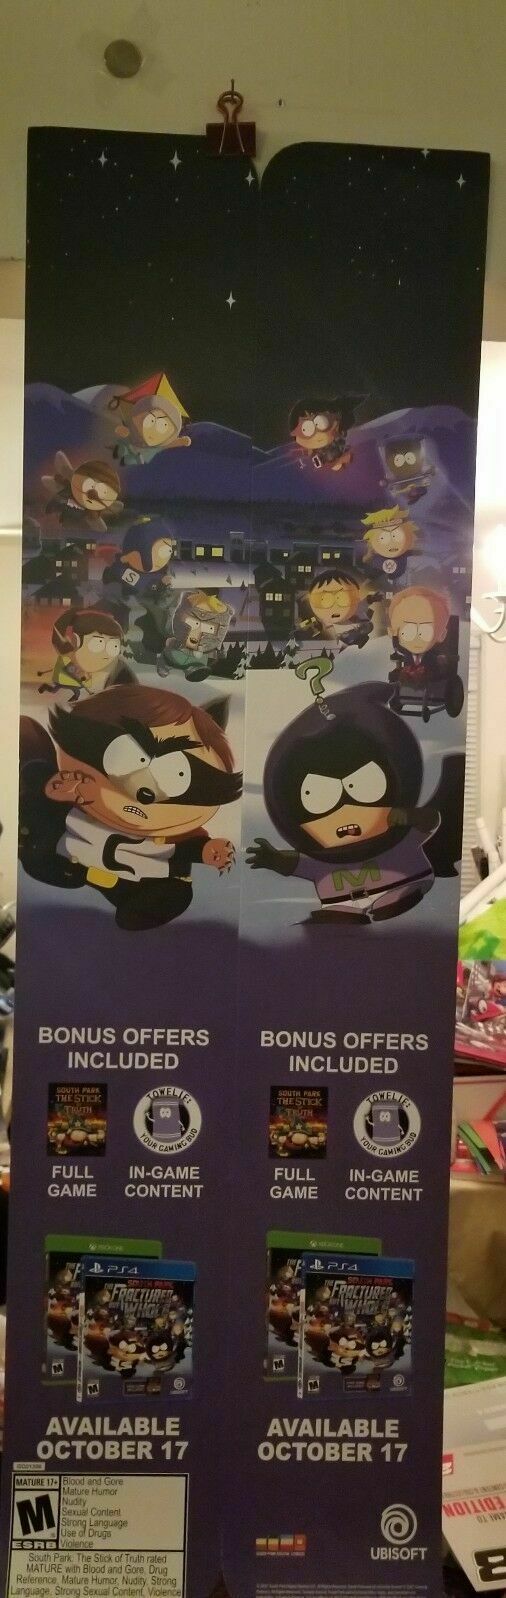 HUGE SOUTH PARK FRACTURED BUT WHOLE GAMESTOP PROMO STANDEE POSTER DISPLAY